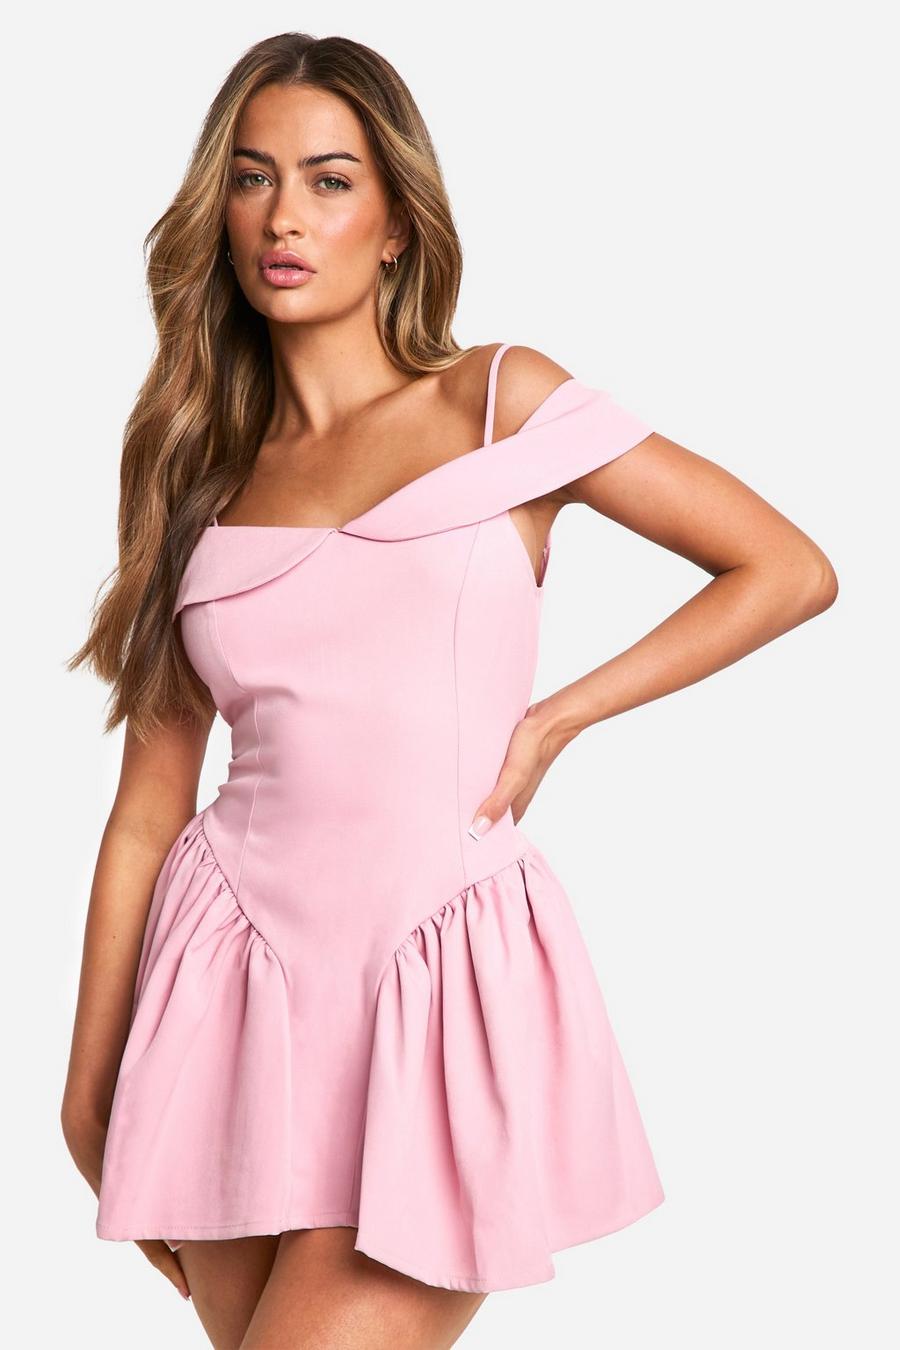 Baby pink Strappy Tailored Full Skirt Mini Dress